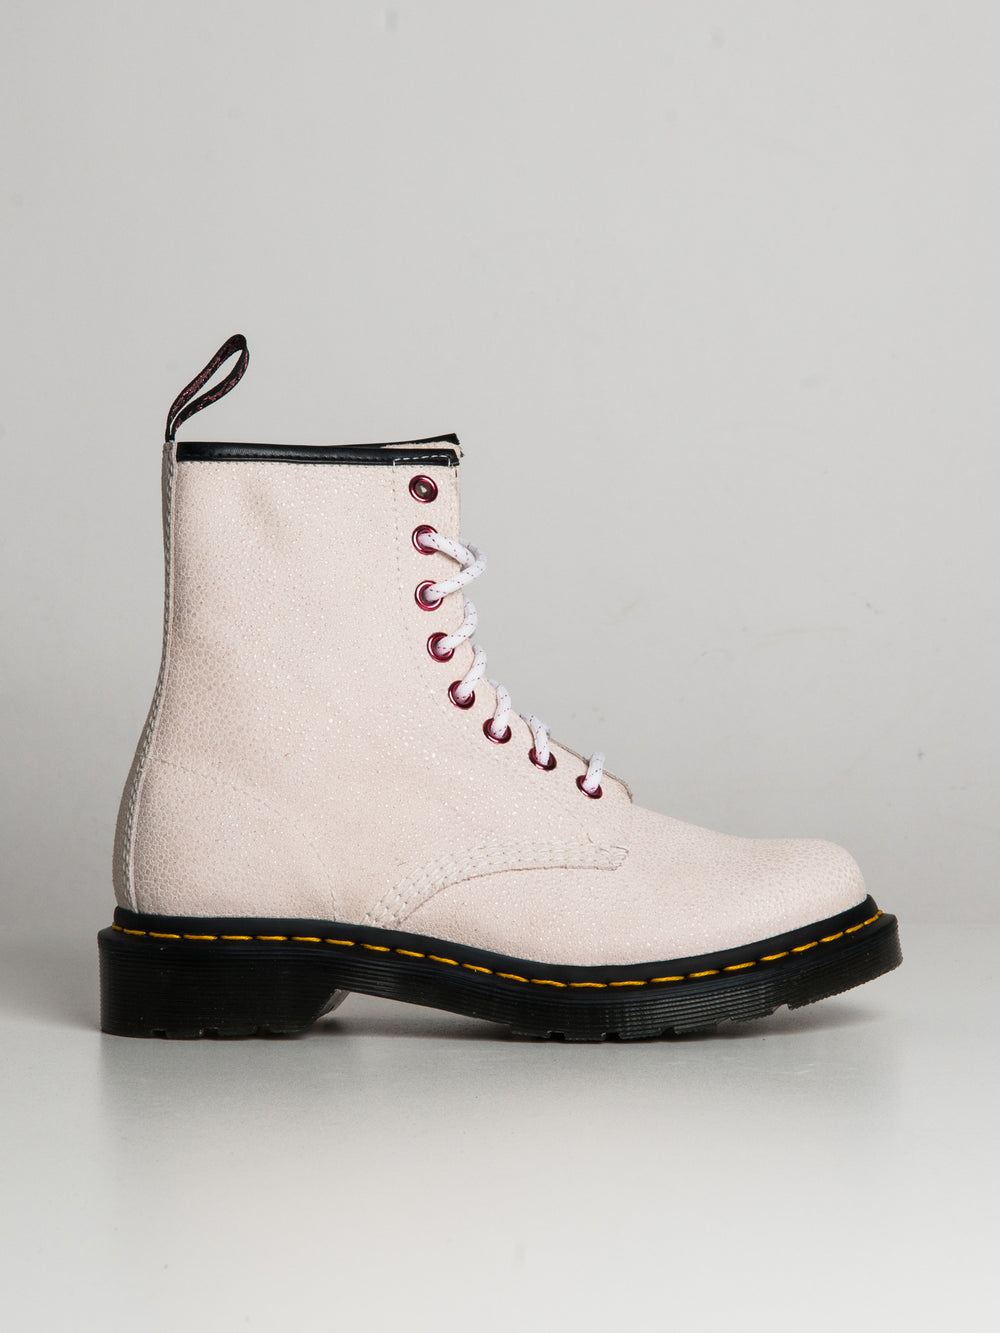 WOMENS DR MARTENS 1460 BEJEWELED BOOT